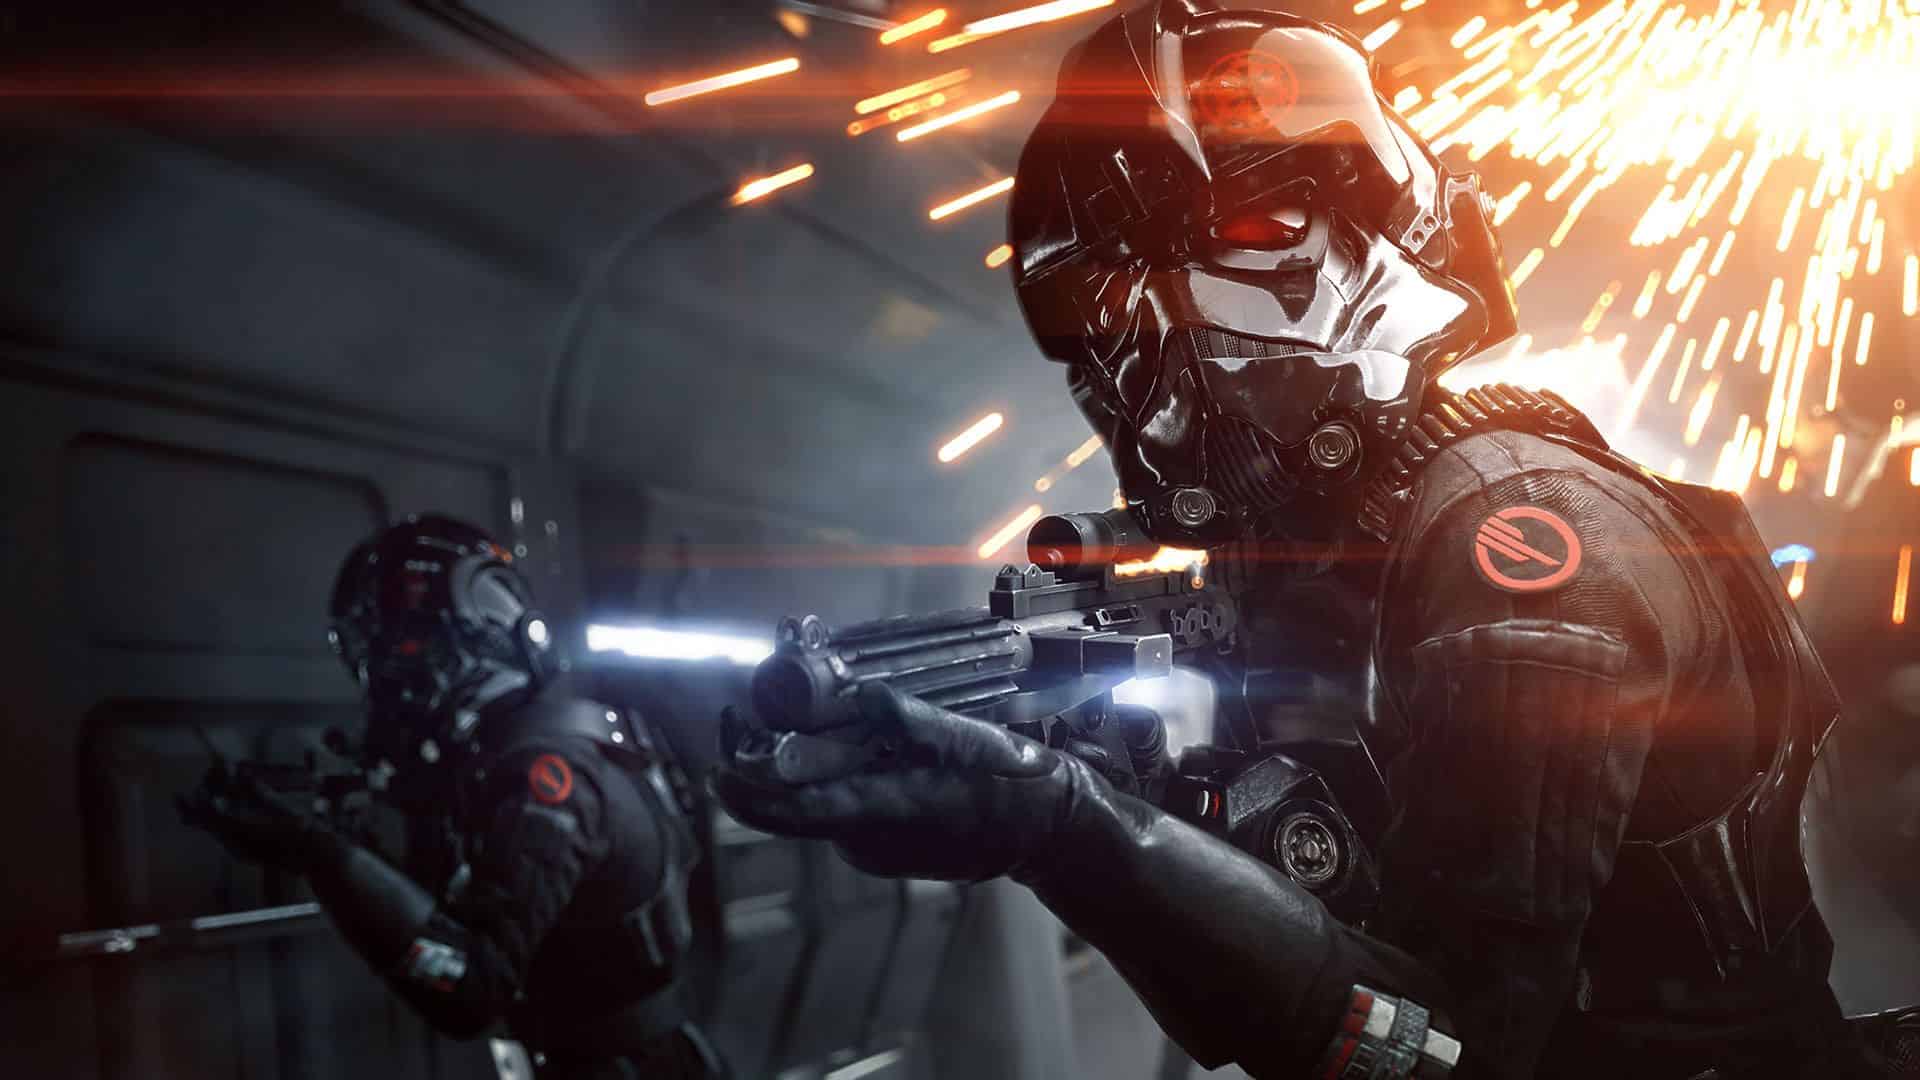 Star Wars Battlefront II: Celebration Edition out tomorrow